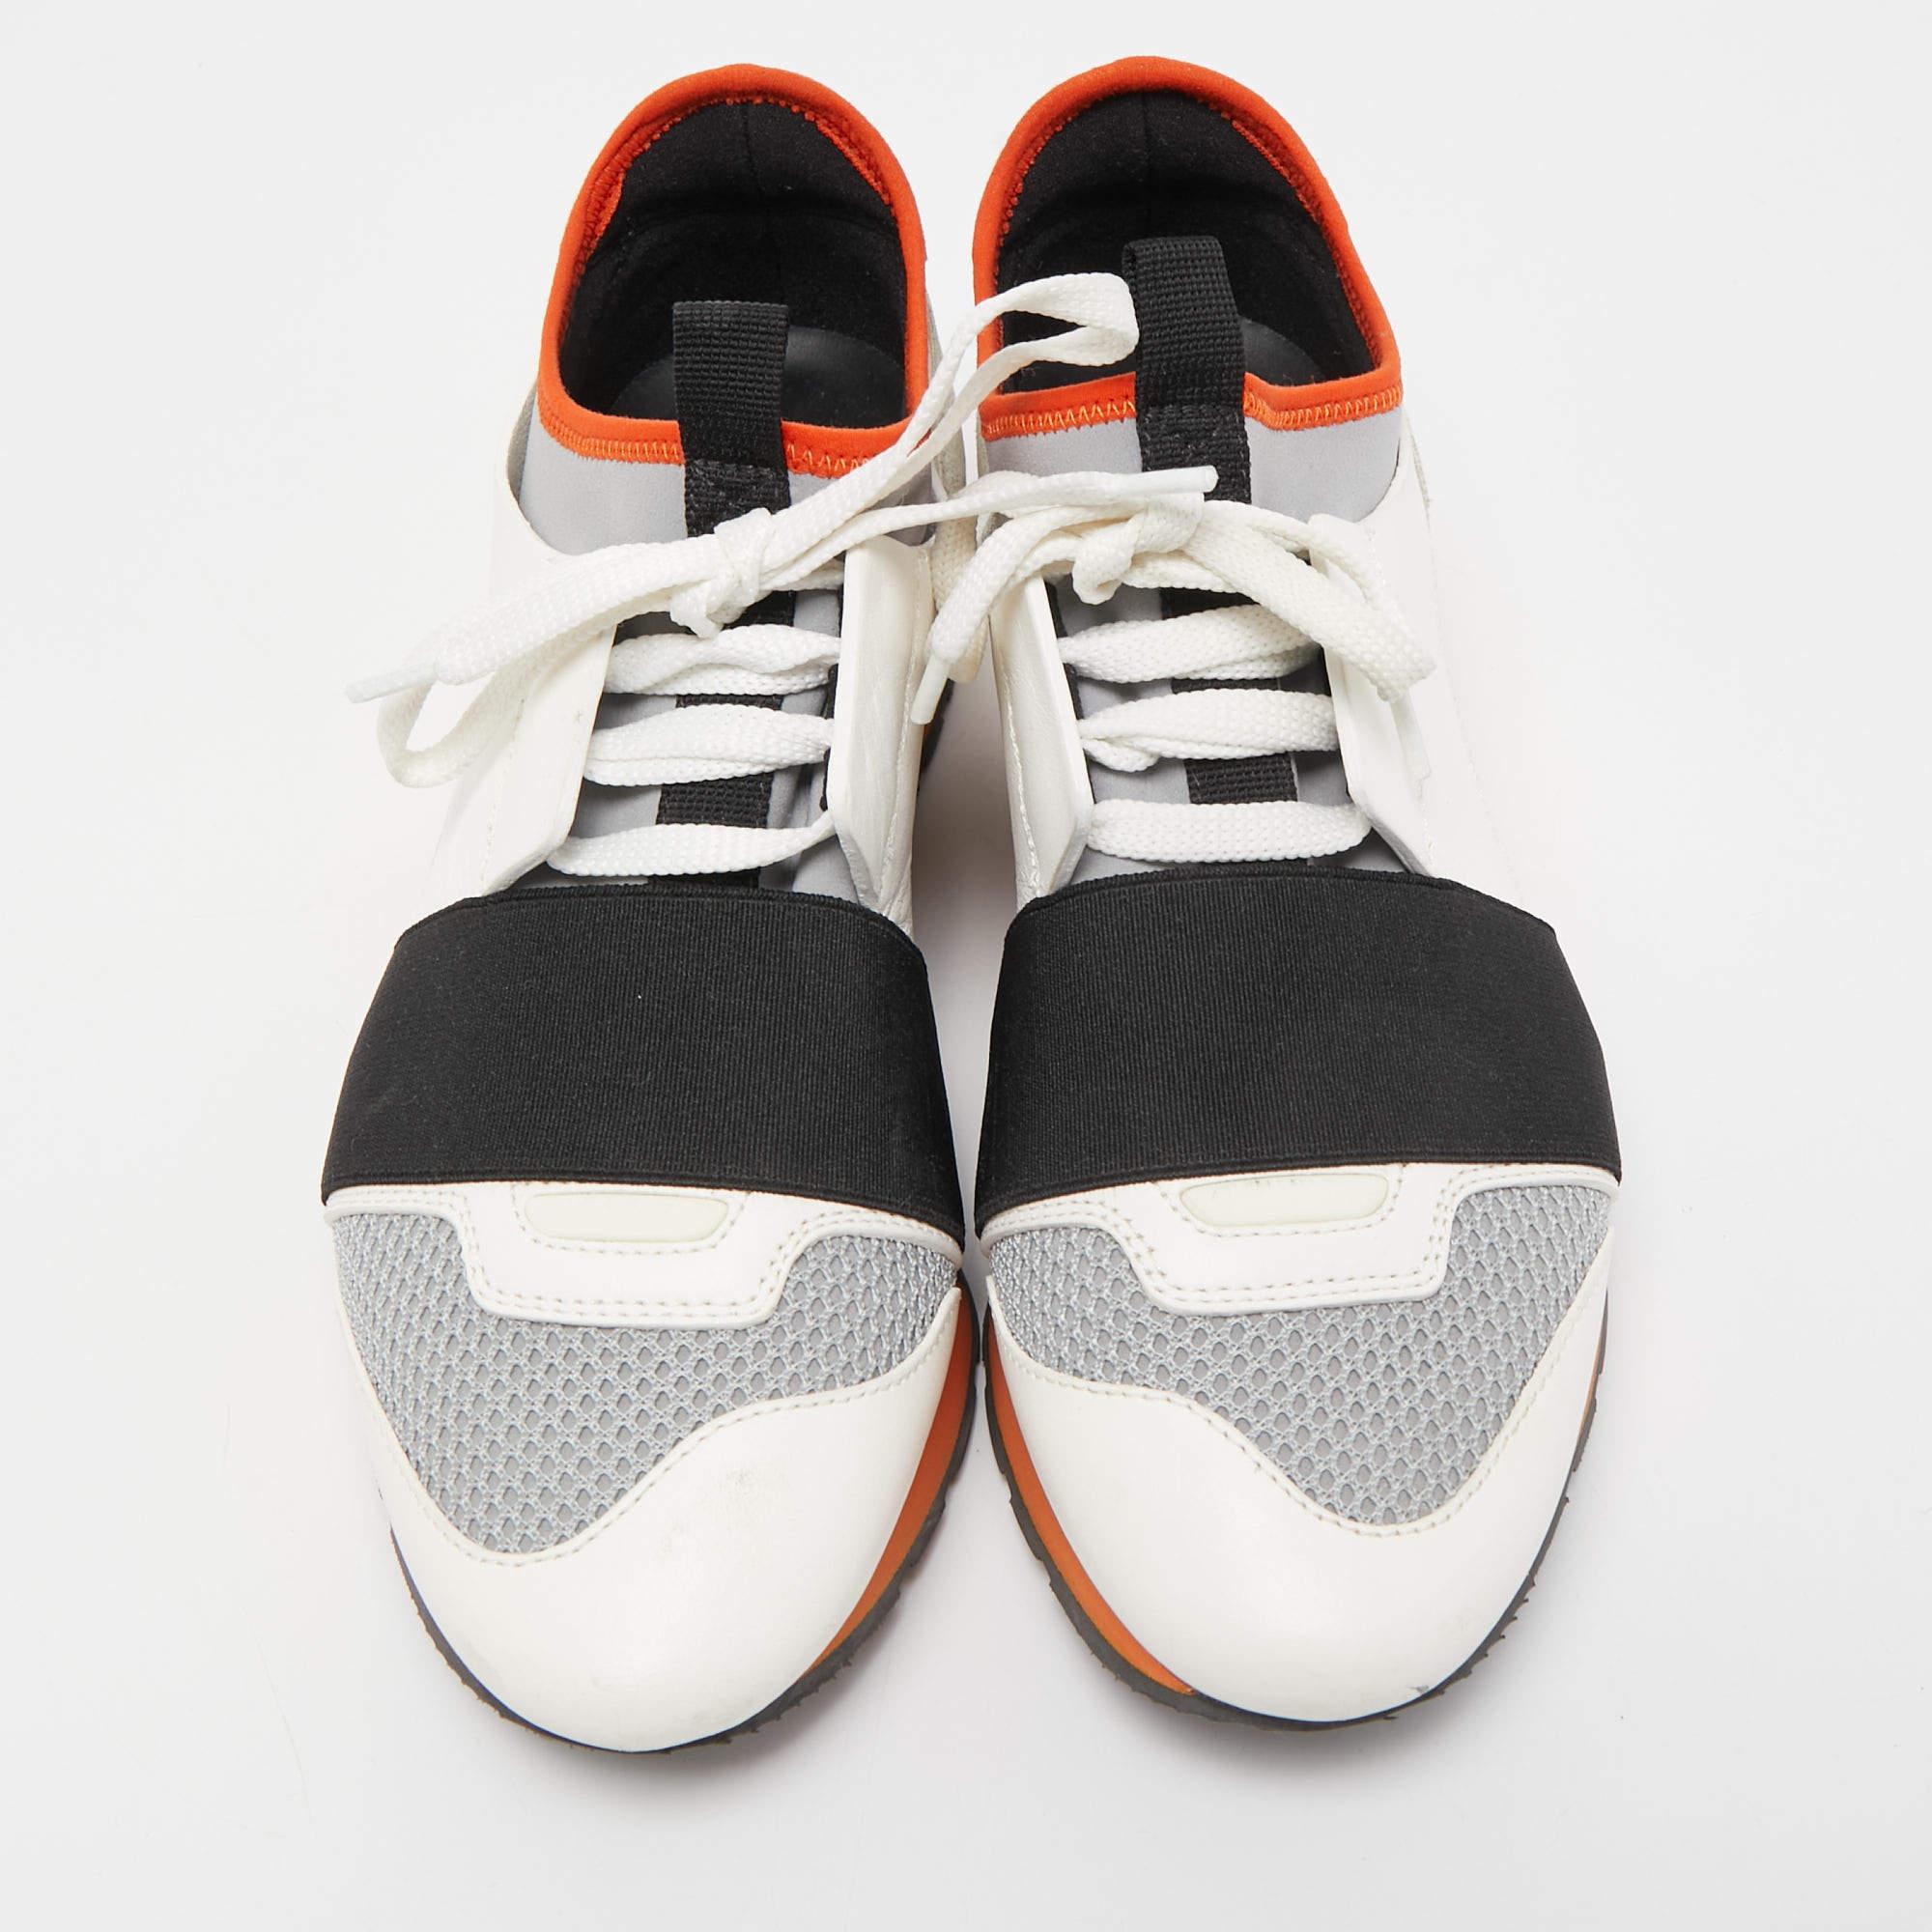 An everyday pair you're going to love is this sneaker by Balenciaga. These sneakers for women are sewn using a mix of materials and set on durable soles.

